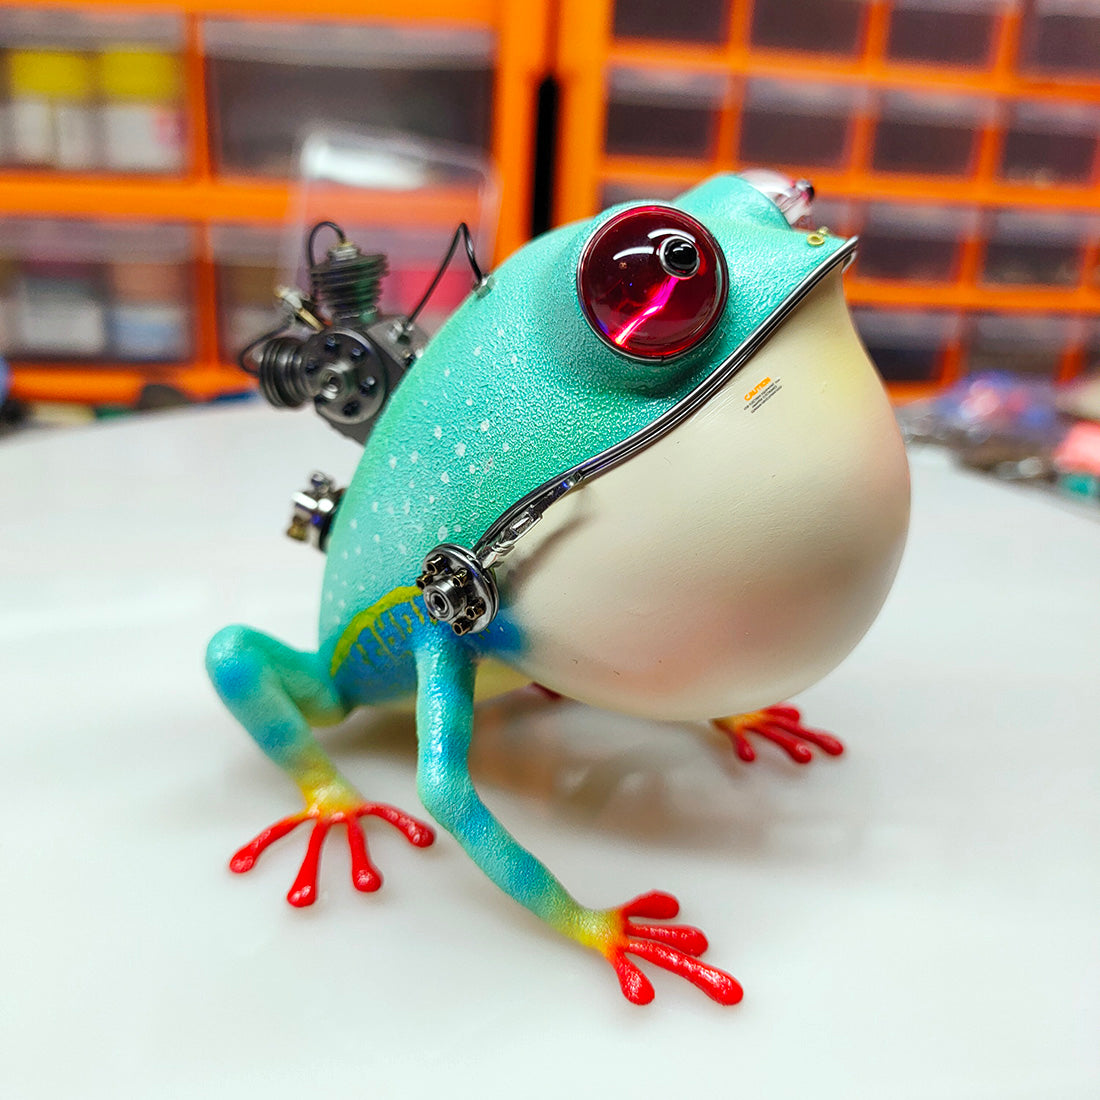 Steampunk Angry Frog Metal Art Craft Model